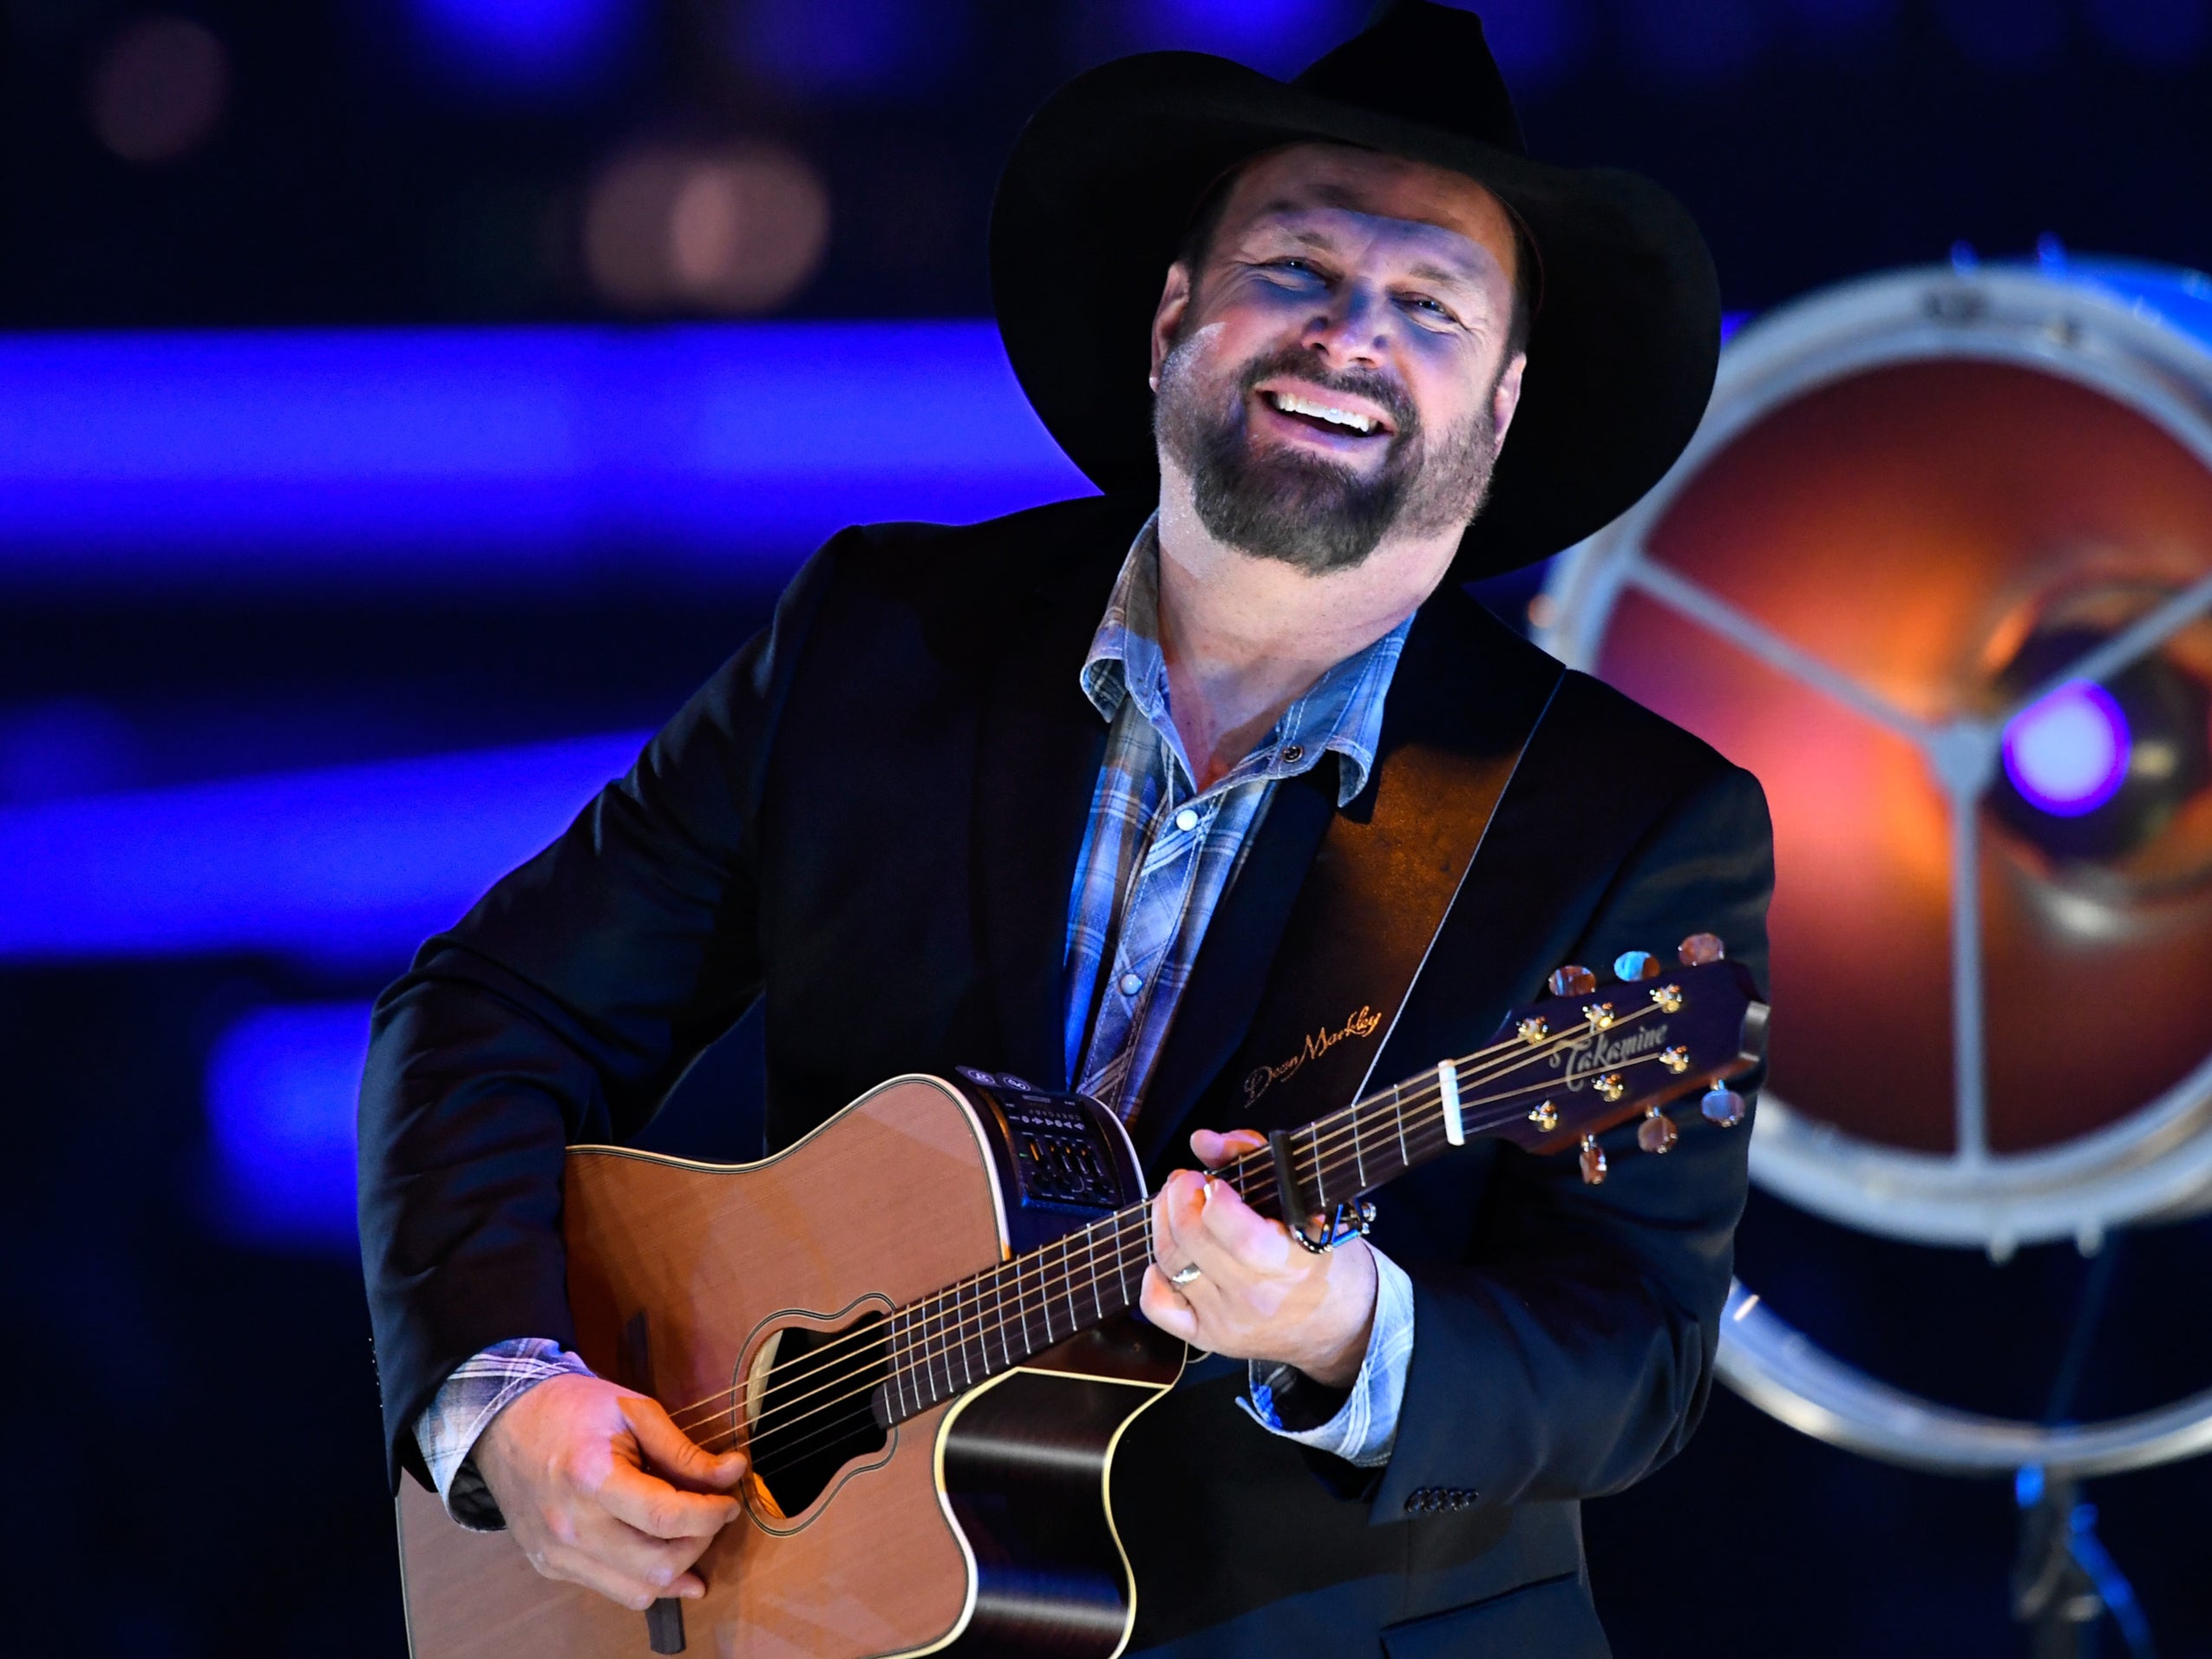 Garth Brooks to perform at Joe Biden’s presidential inauguration: ‘This is a statement of unity’